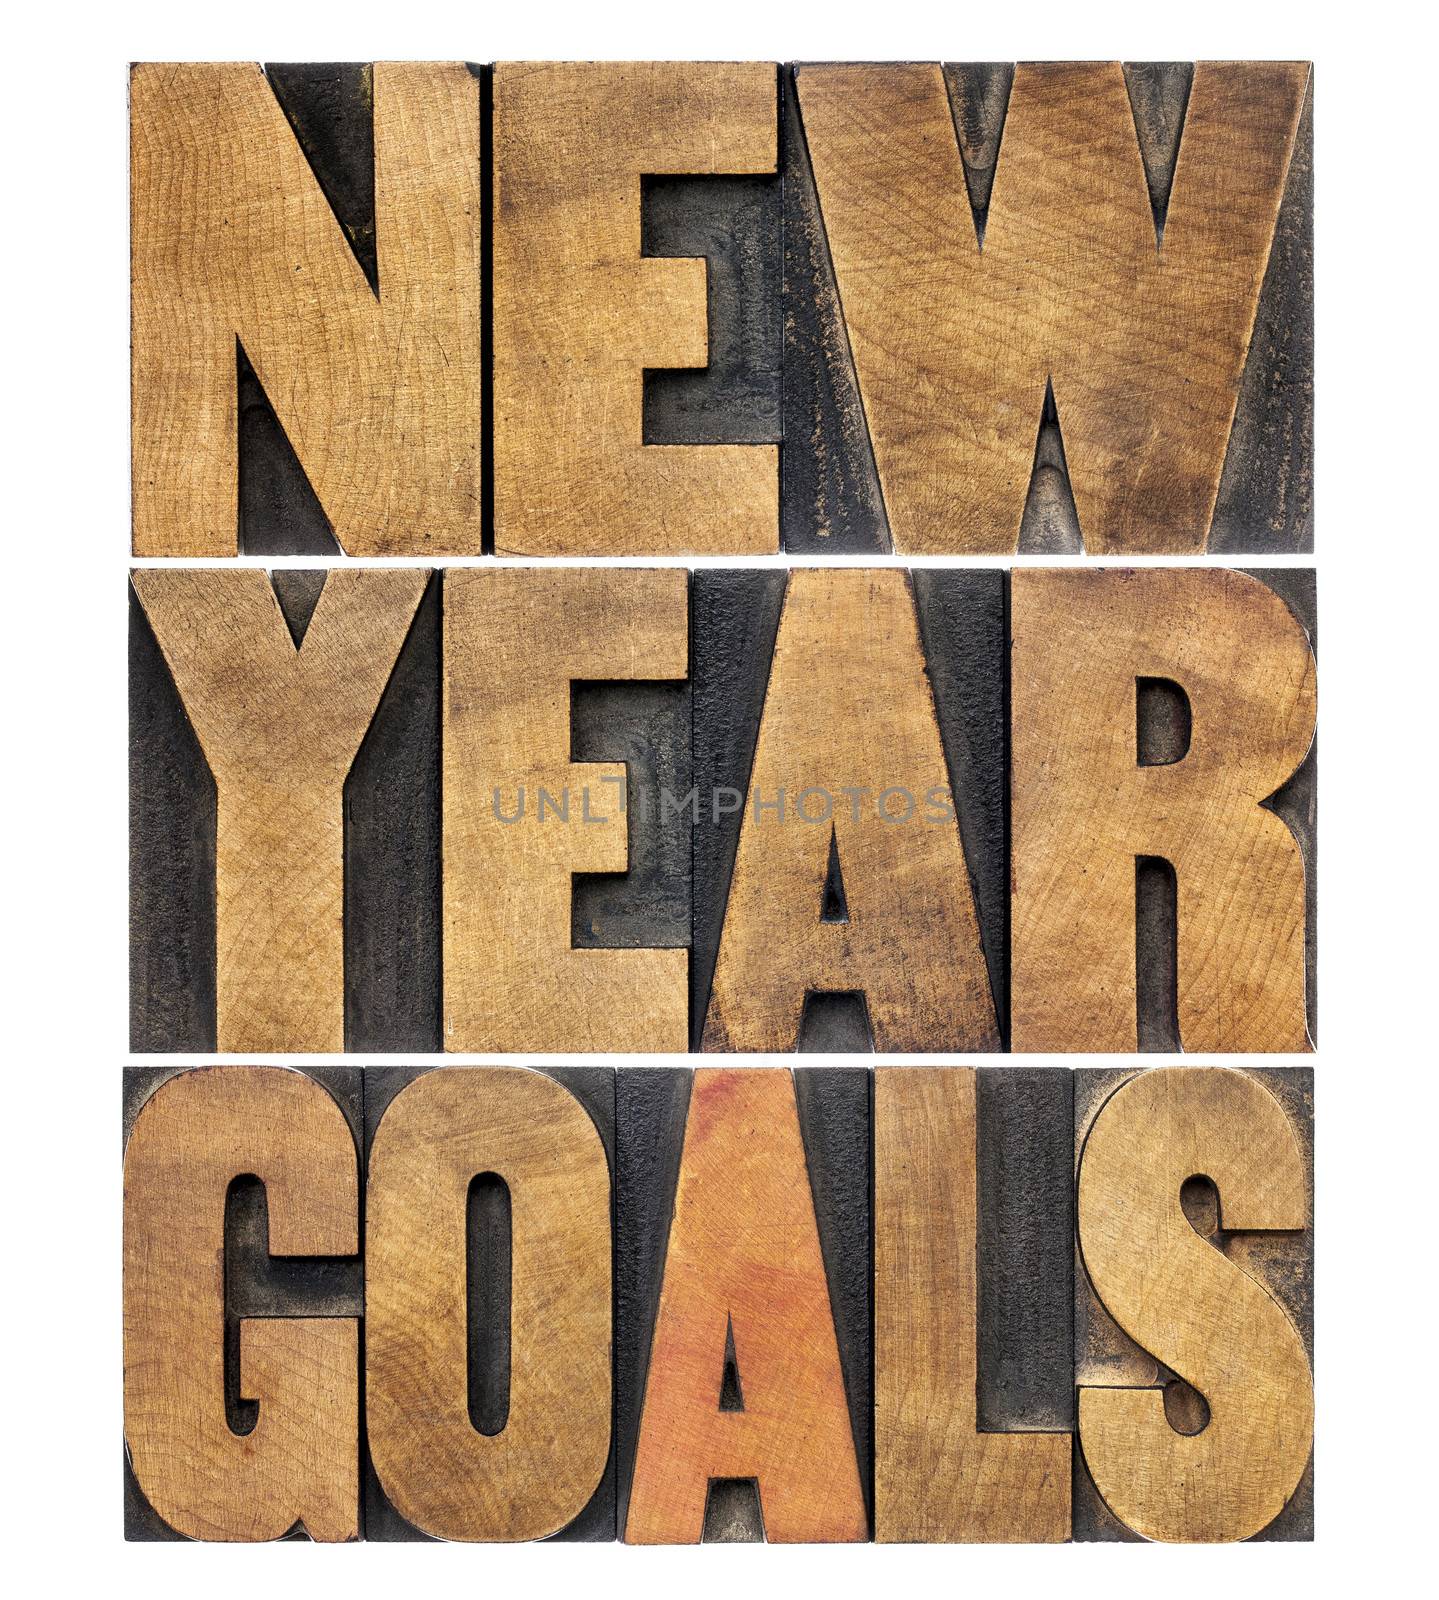 New Year goals by PixelsAway